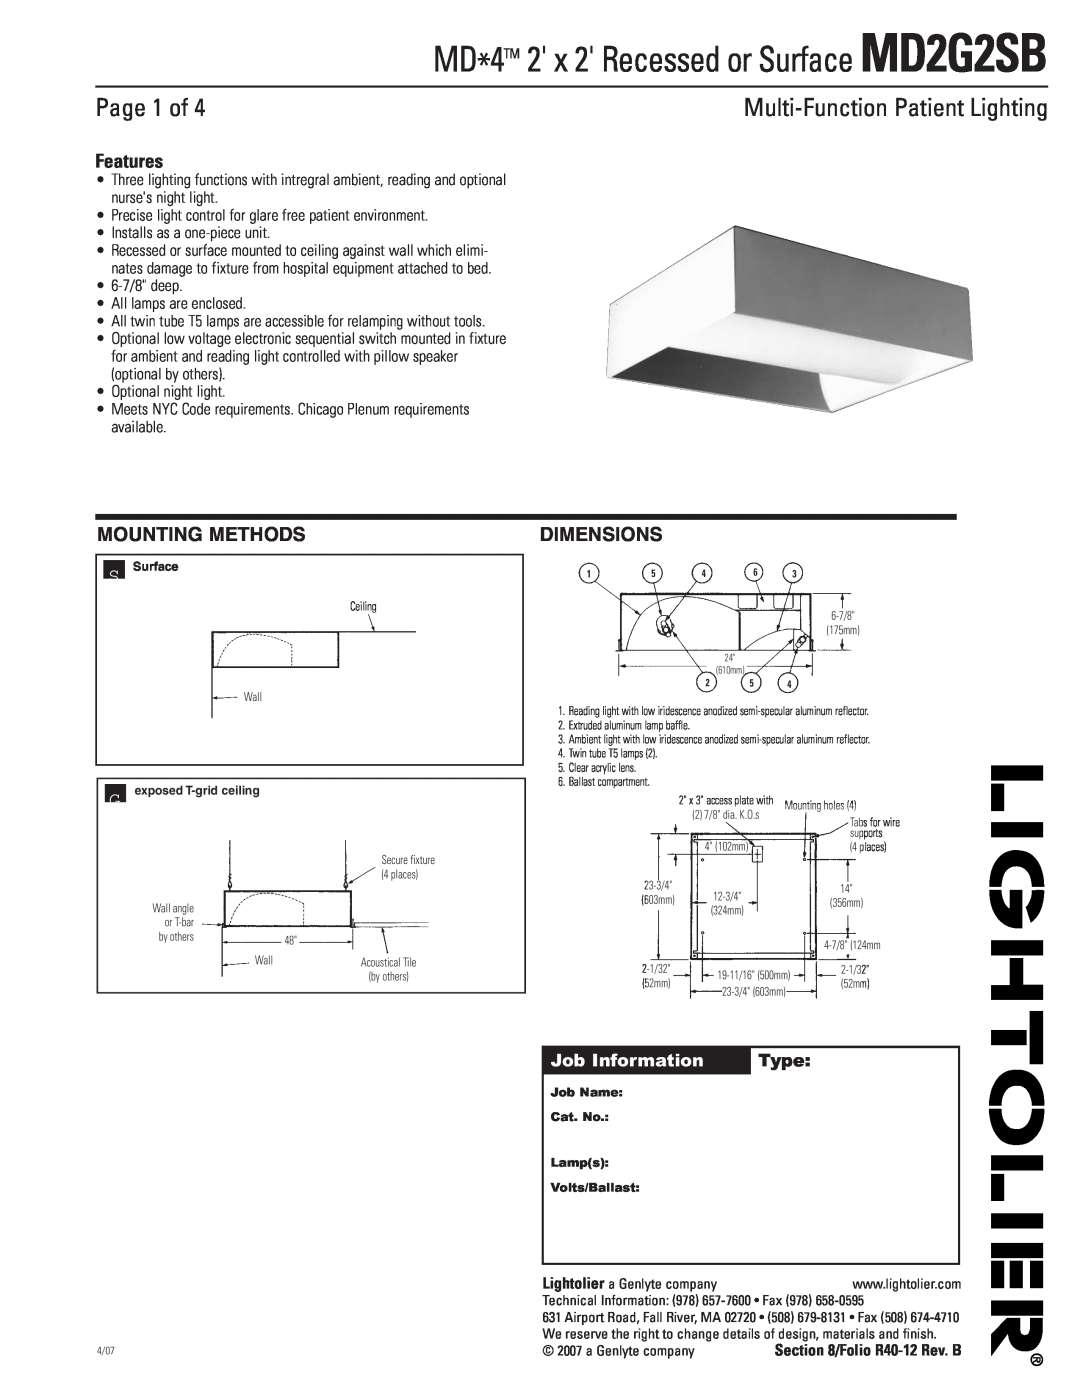 Lightolier dimensions MD*4TM 2 x 2 Recessed or Surface MD2G2SB, Page 1 of, Multi-FunctionPatient Lighting, Features 